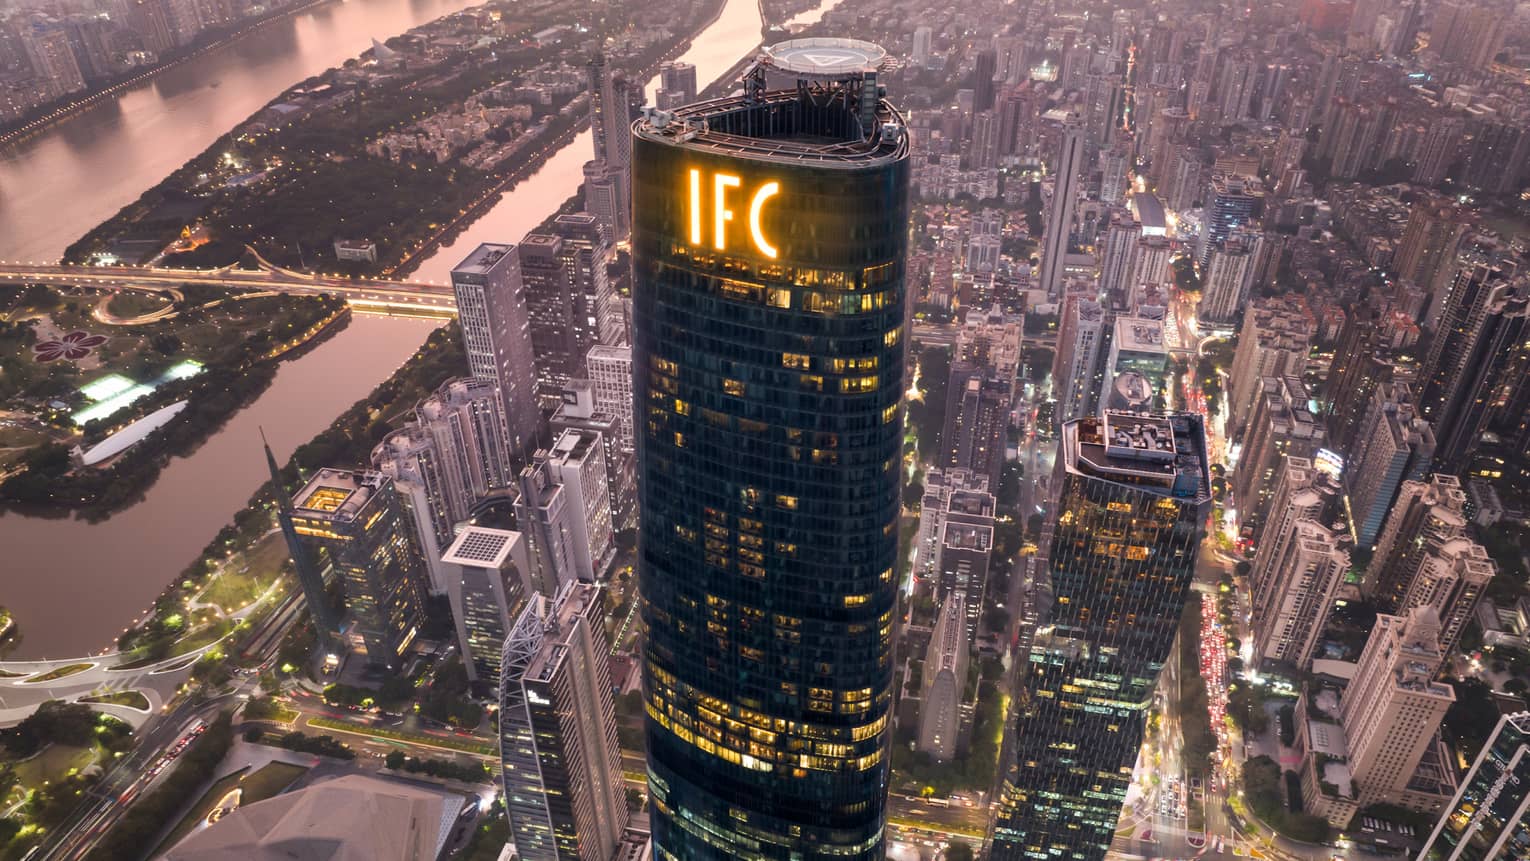 Aerial view of the IFC building in Guangzhou, China